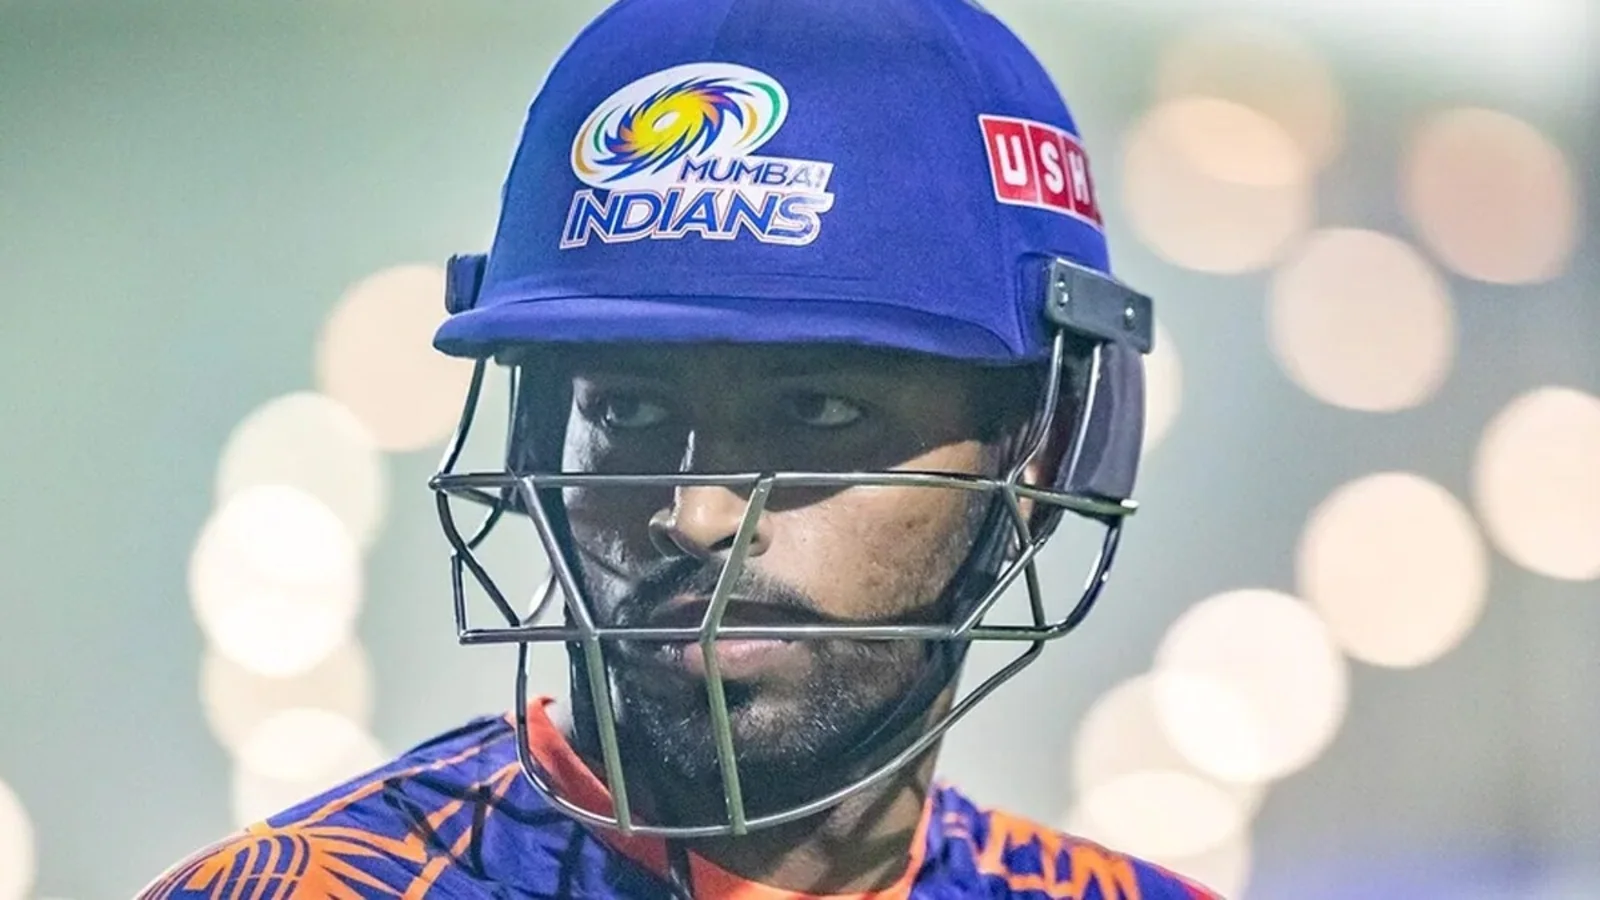 IPL 2022: ‘Until you improve, we can’t give you a match’ – Mumbai Indians youngster recalls Hardik Pandya’s strict words